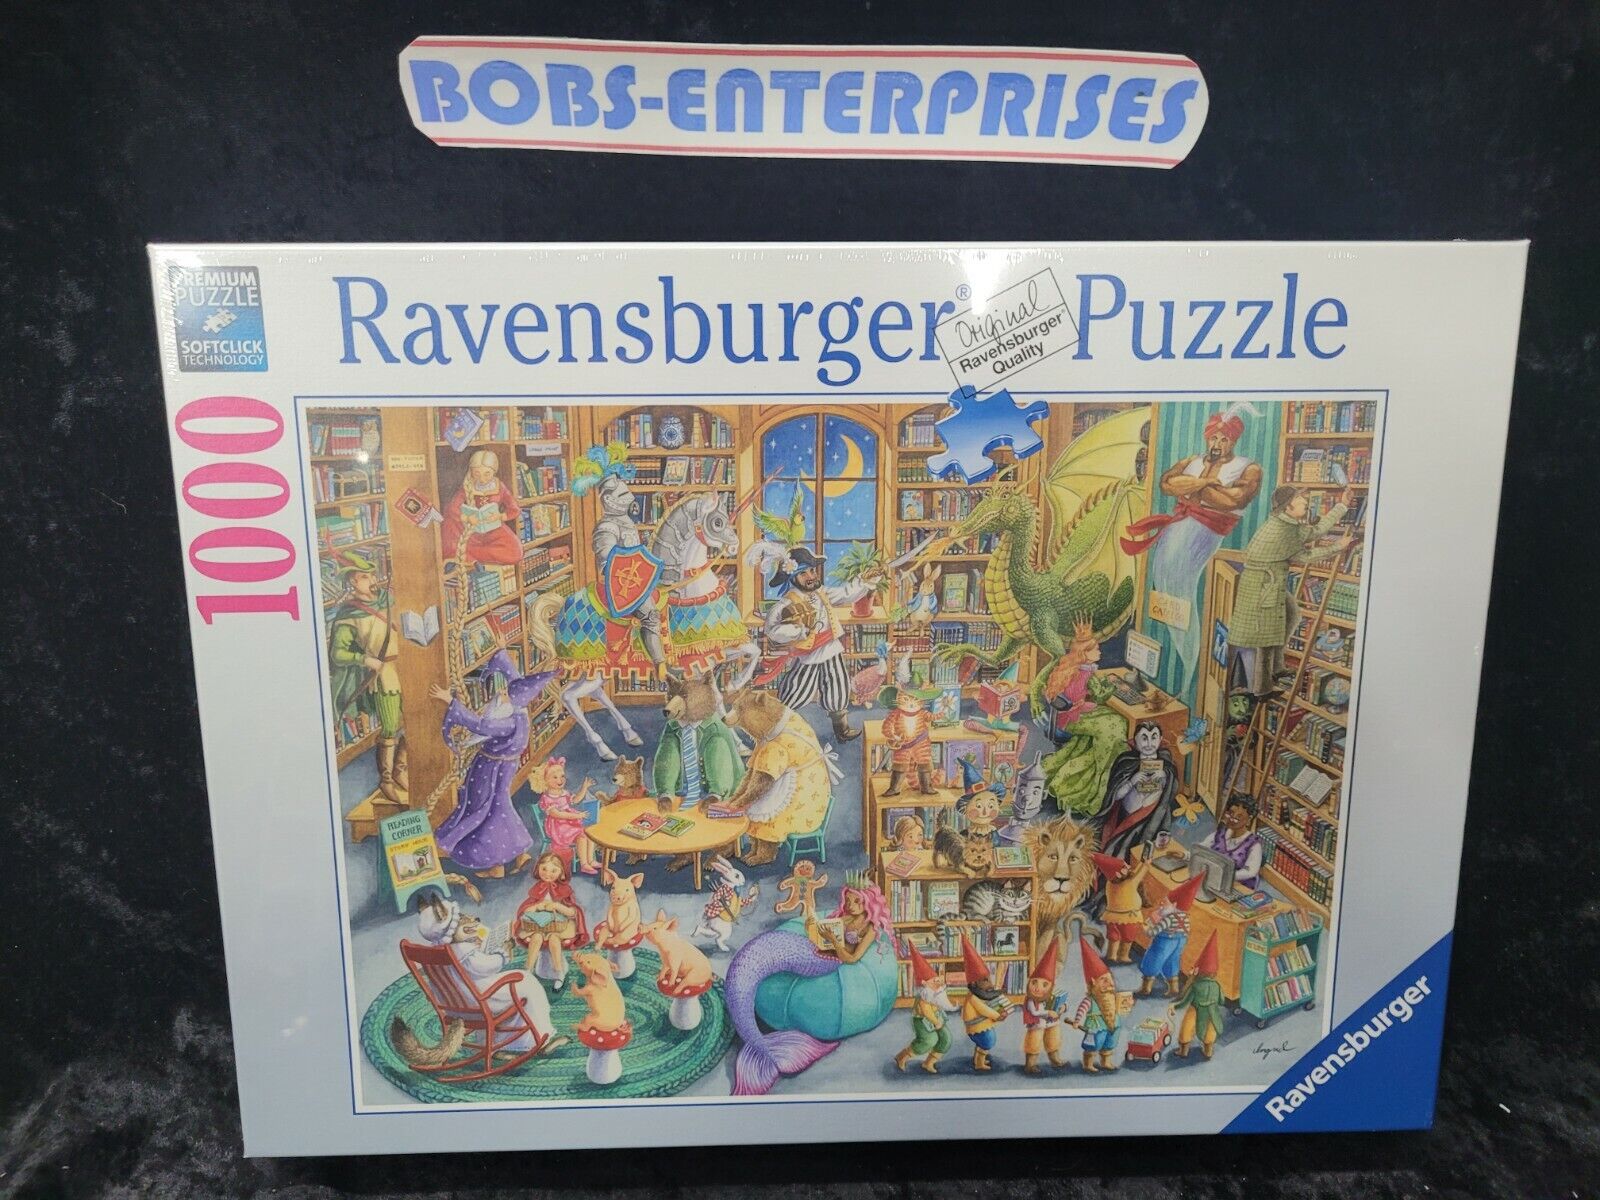 Ravensburger 1000 PC Jigsaw Puzzle Midnight at The Library - Books 